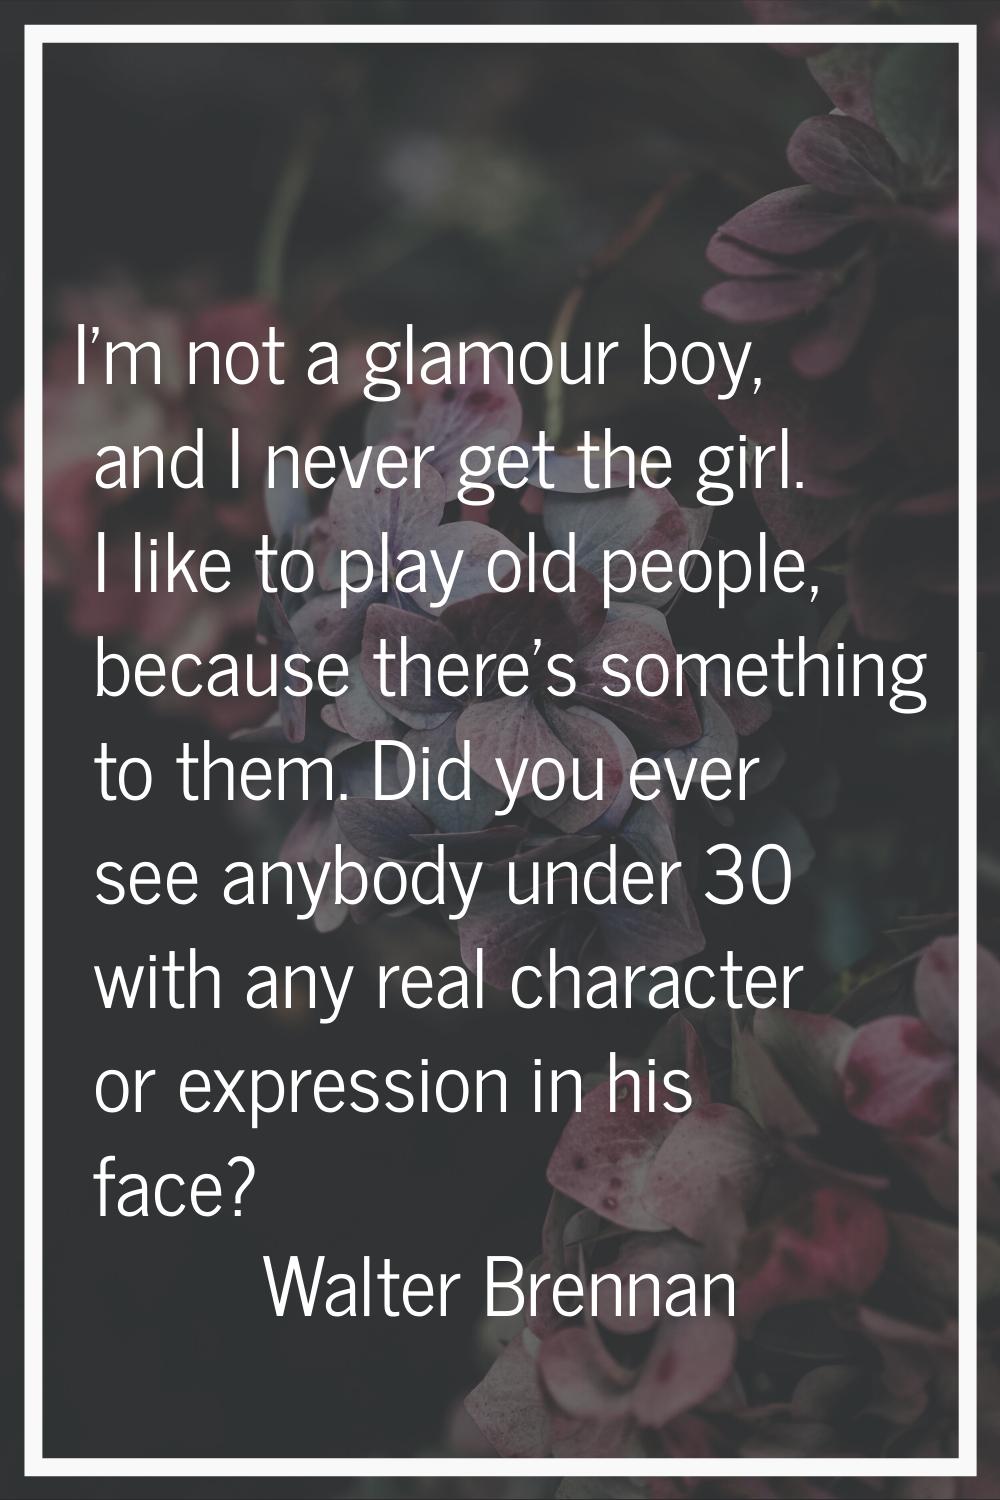 I'm not a glamour boy, and I never get the girl. I like to play old people, because there's somethi